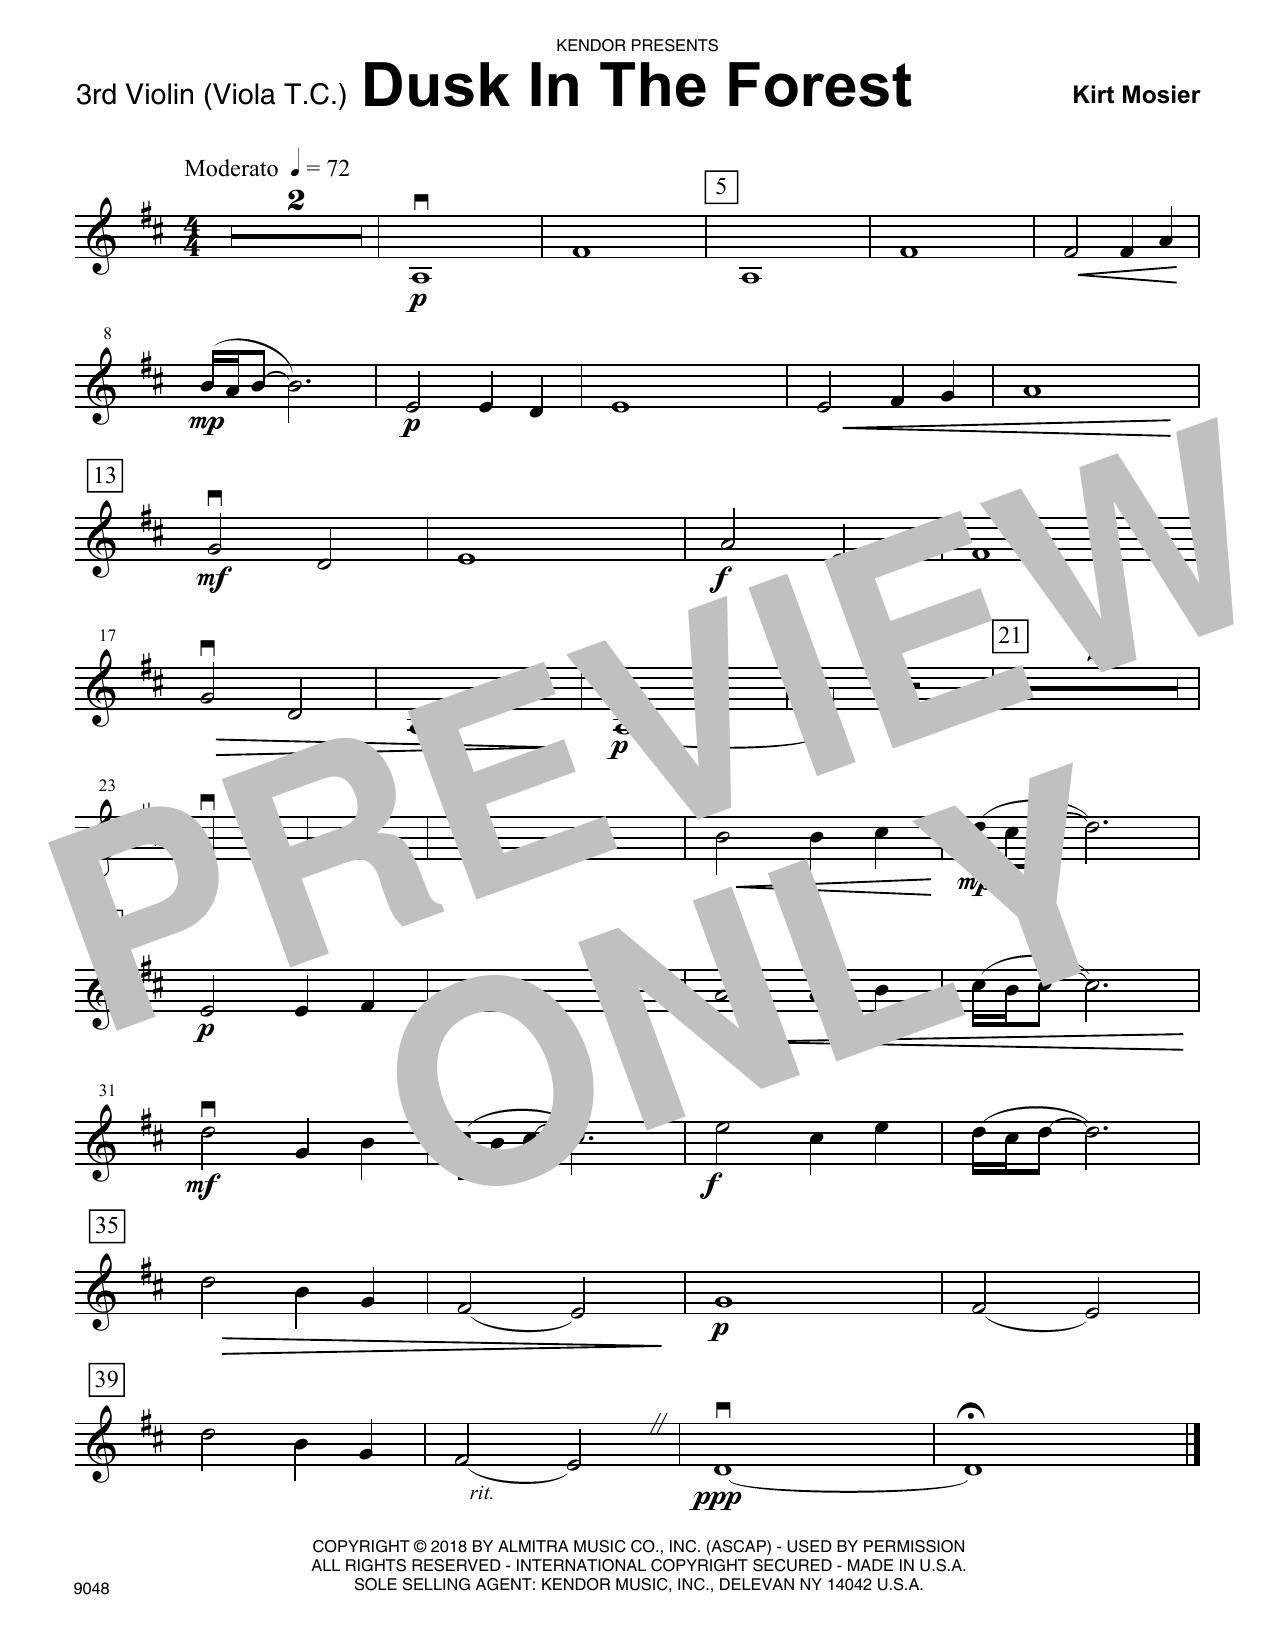 Download Kirt Mosier Dusk In The Forest - Violin 3 (Viola T. Sheet Music